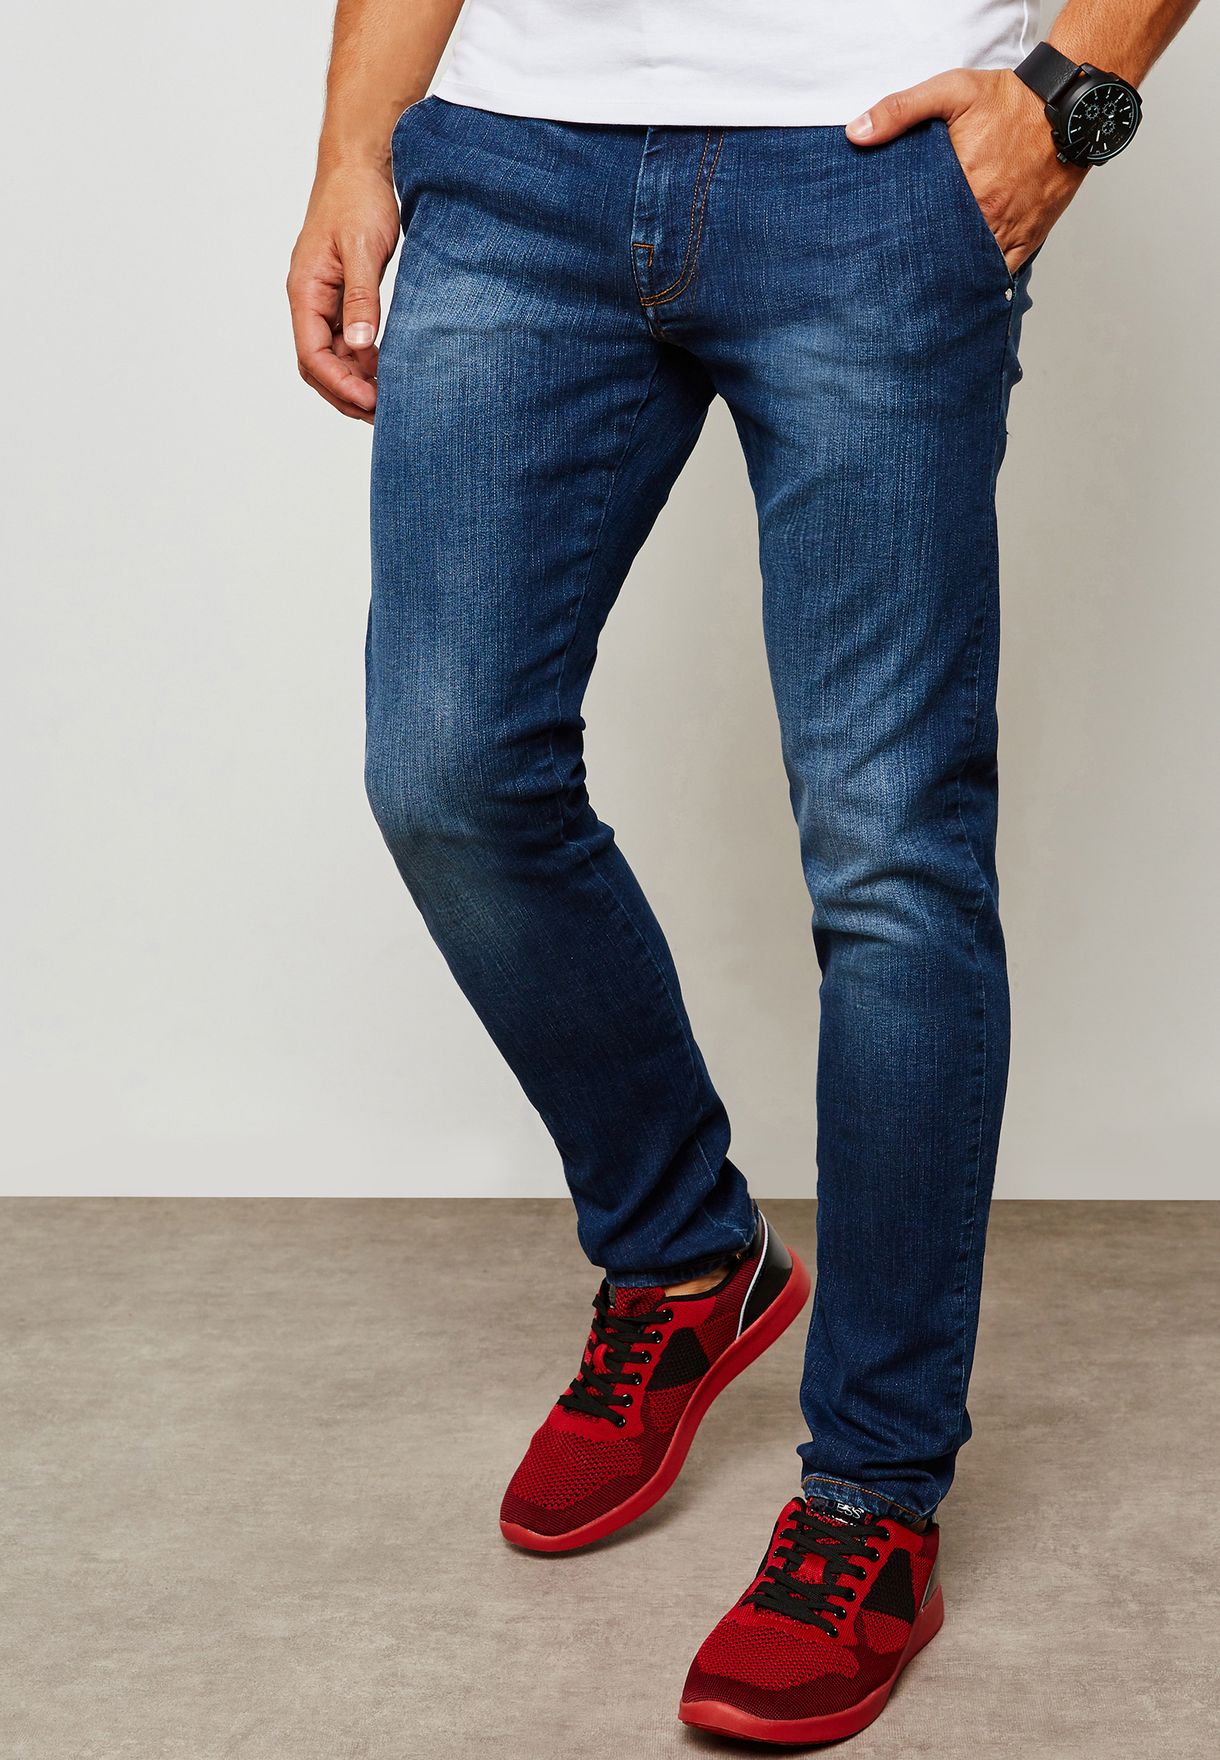 guess jeans mens